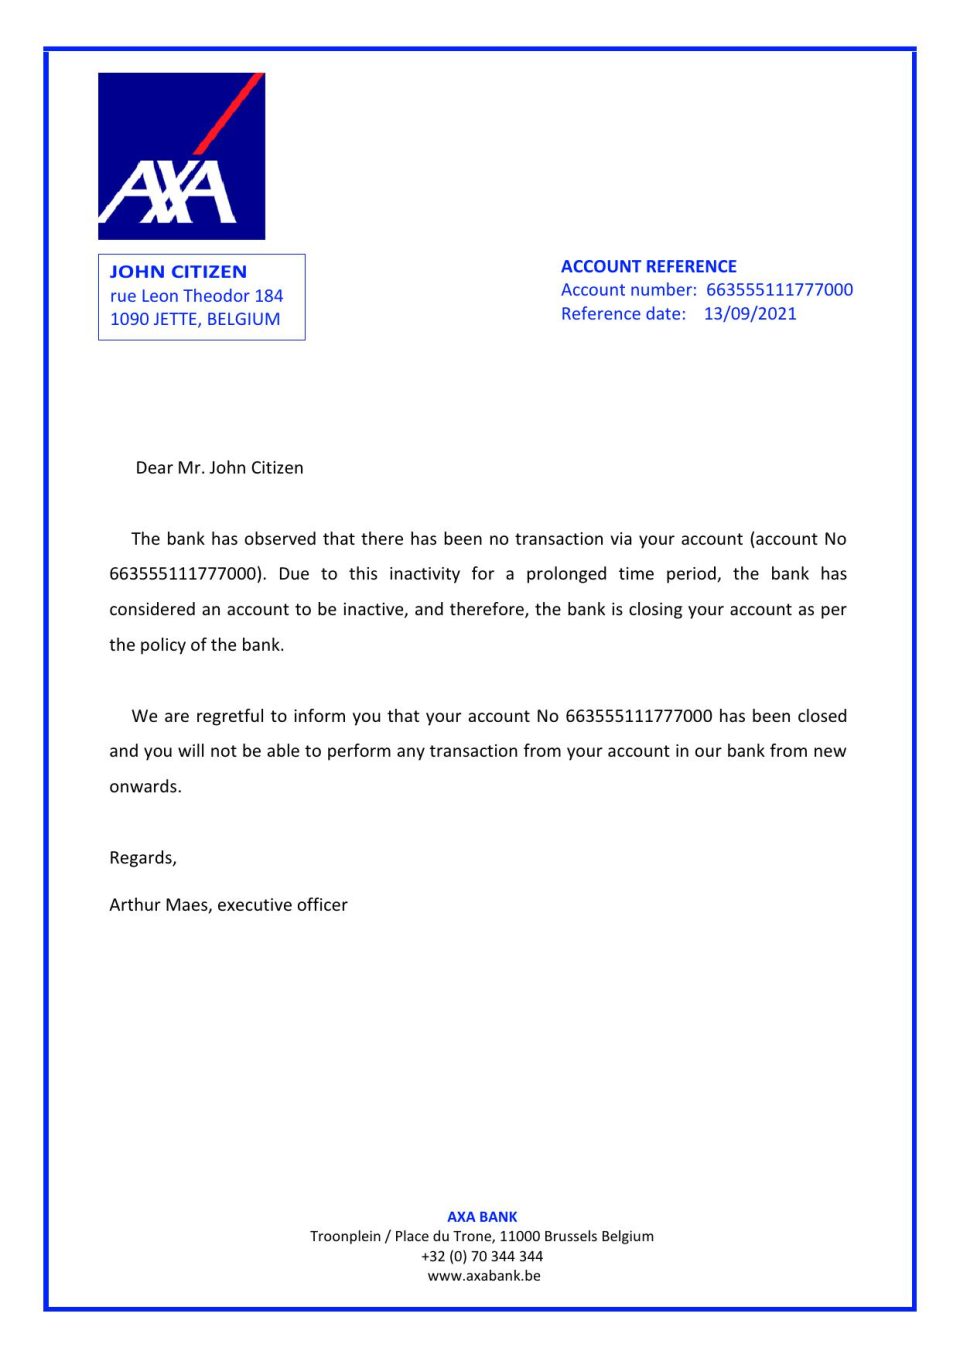 Download Belgium AXA Bank Reference Letter Templates | Editable Word